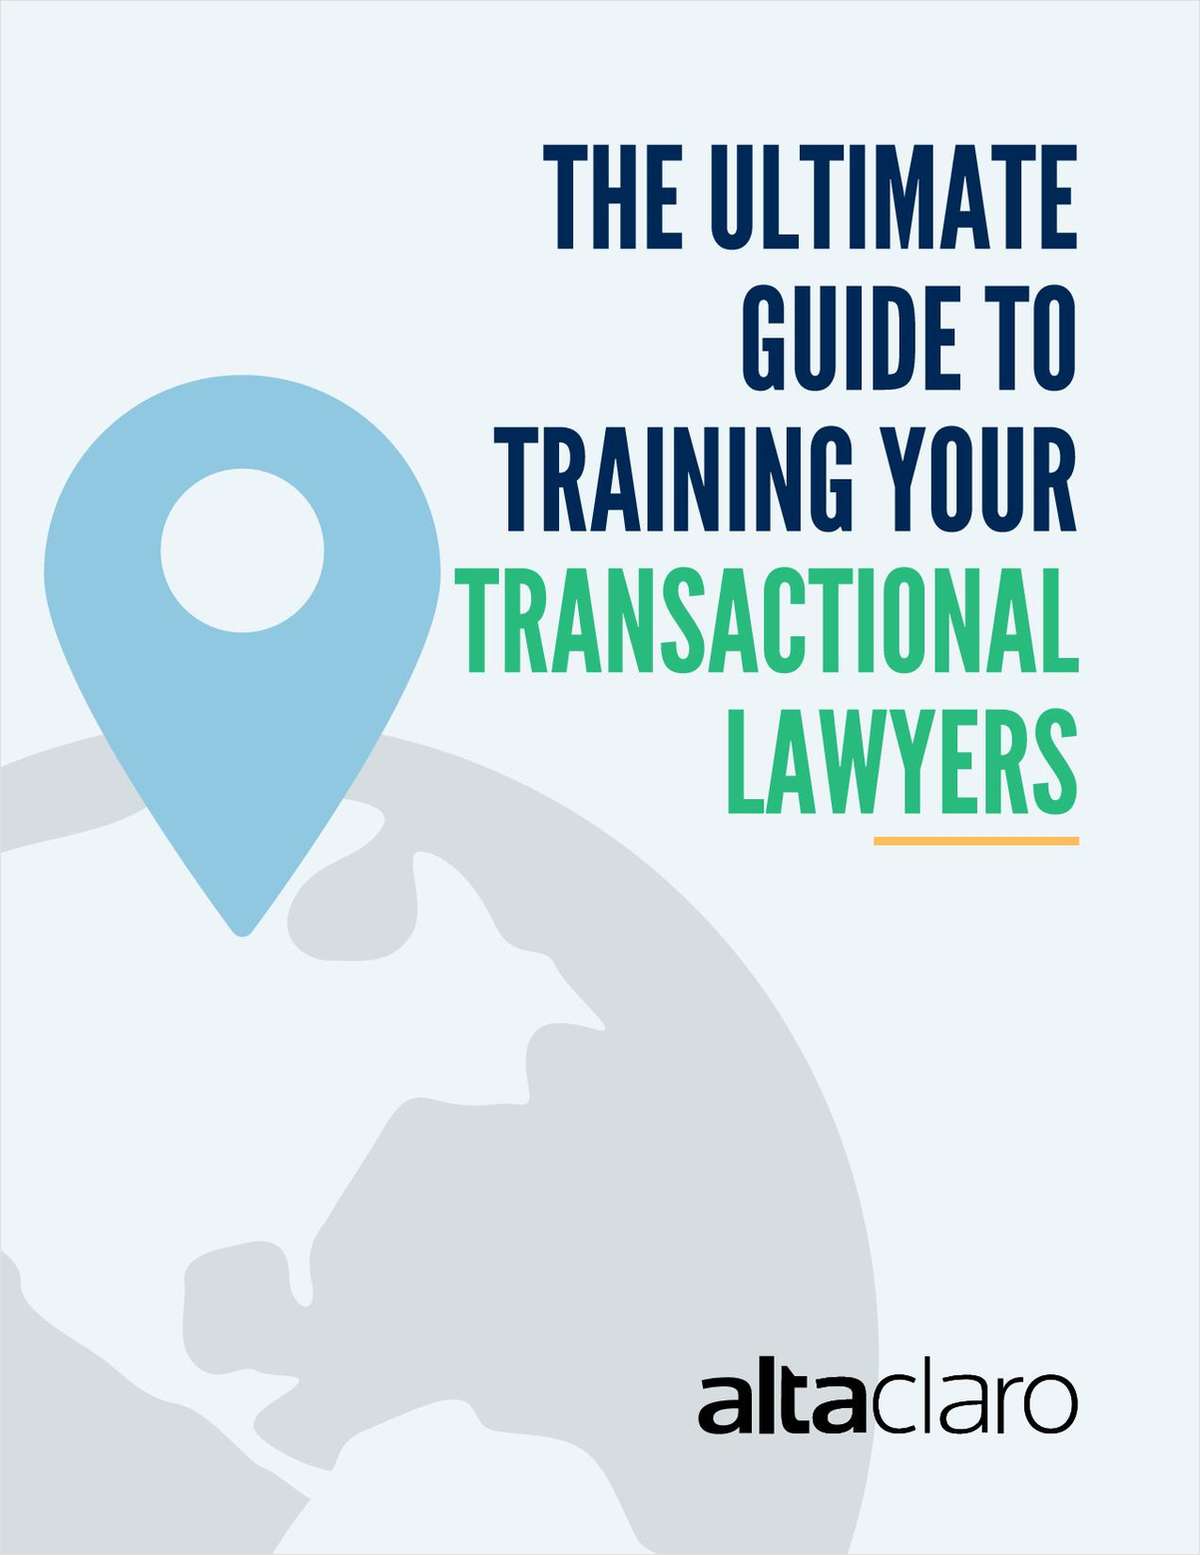 The Ultimate Guide to Training Your Transactional Lawyers